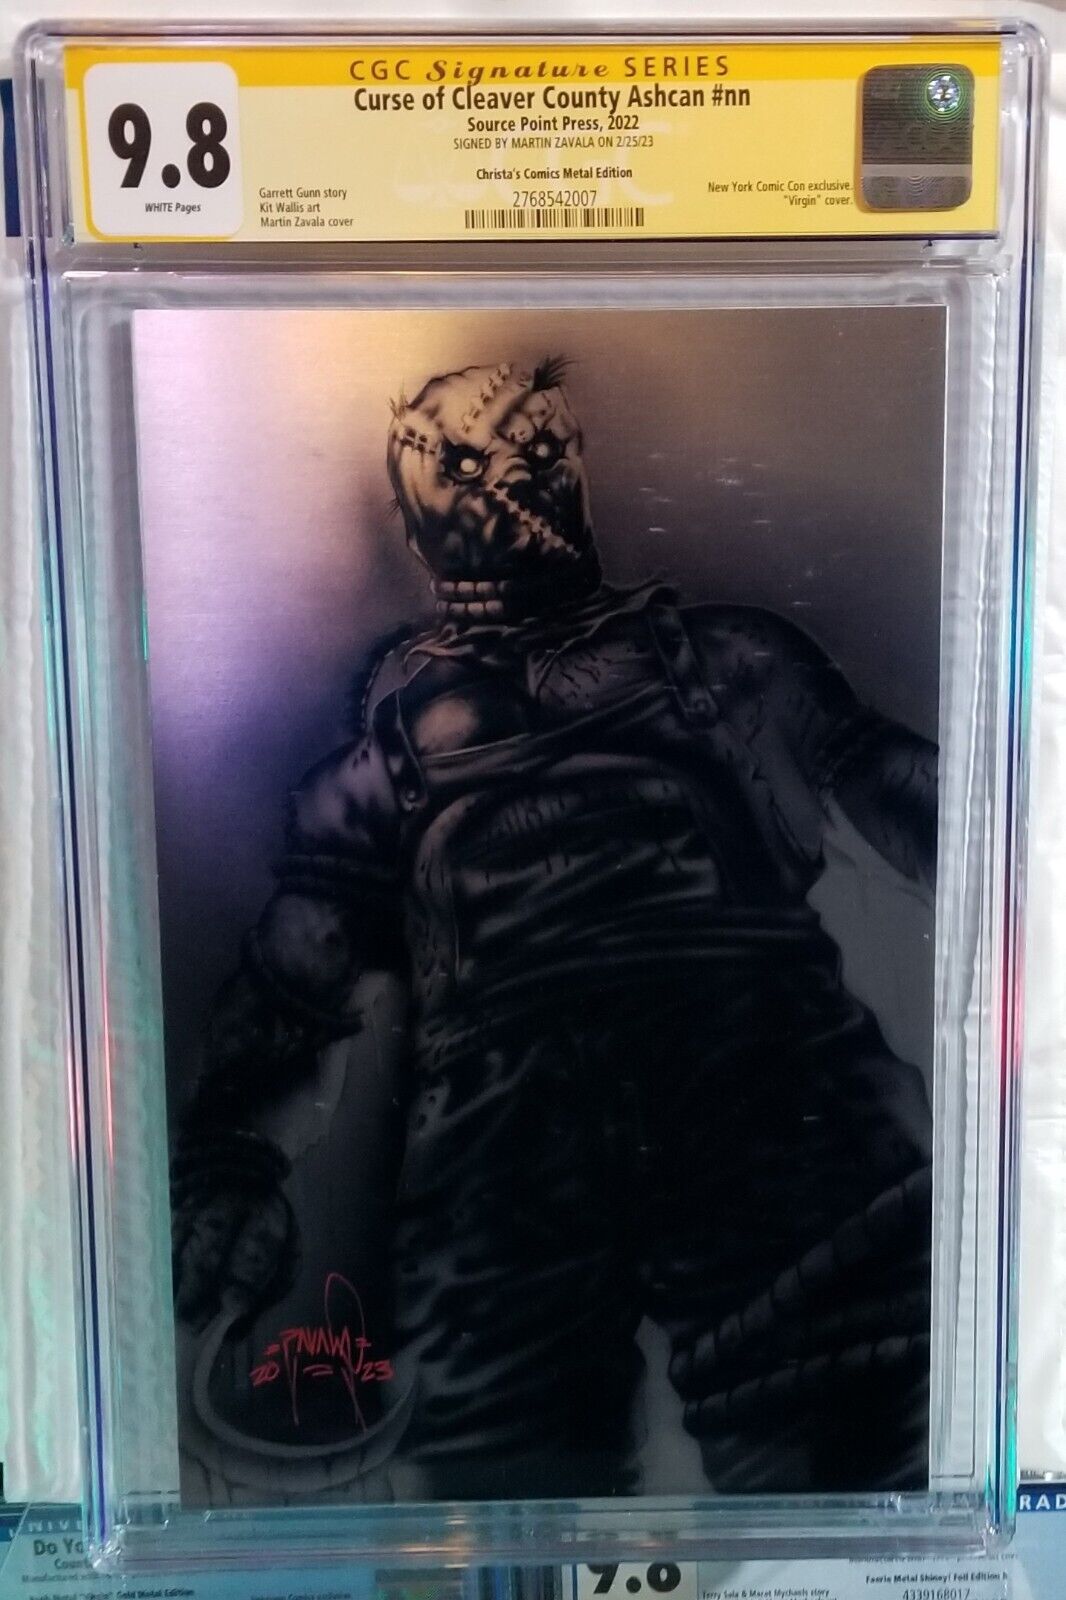 Curse Of Cleaver County Ashcan - CGC 9.8 SS - METAL - Signed by MARTIN ZAVALA